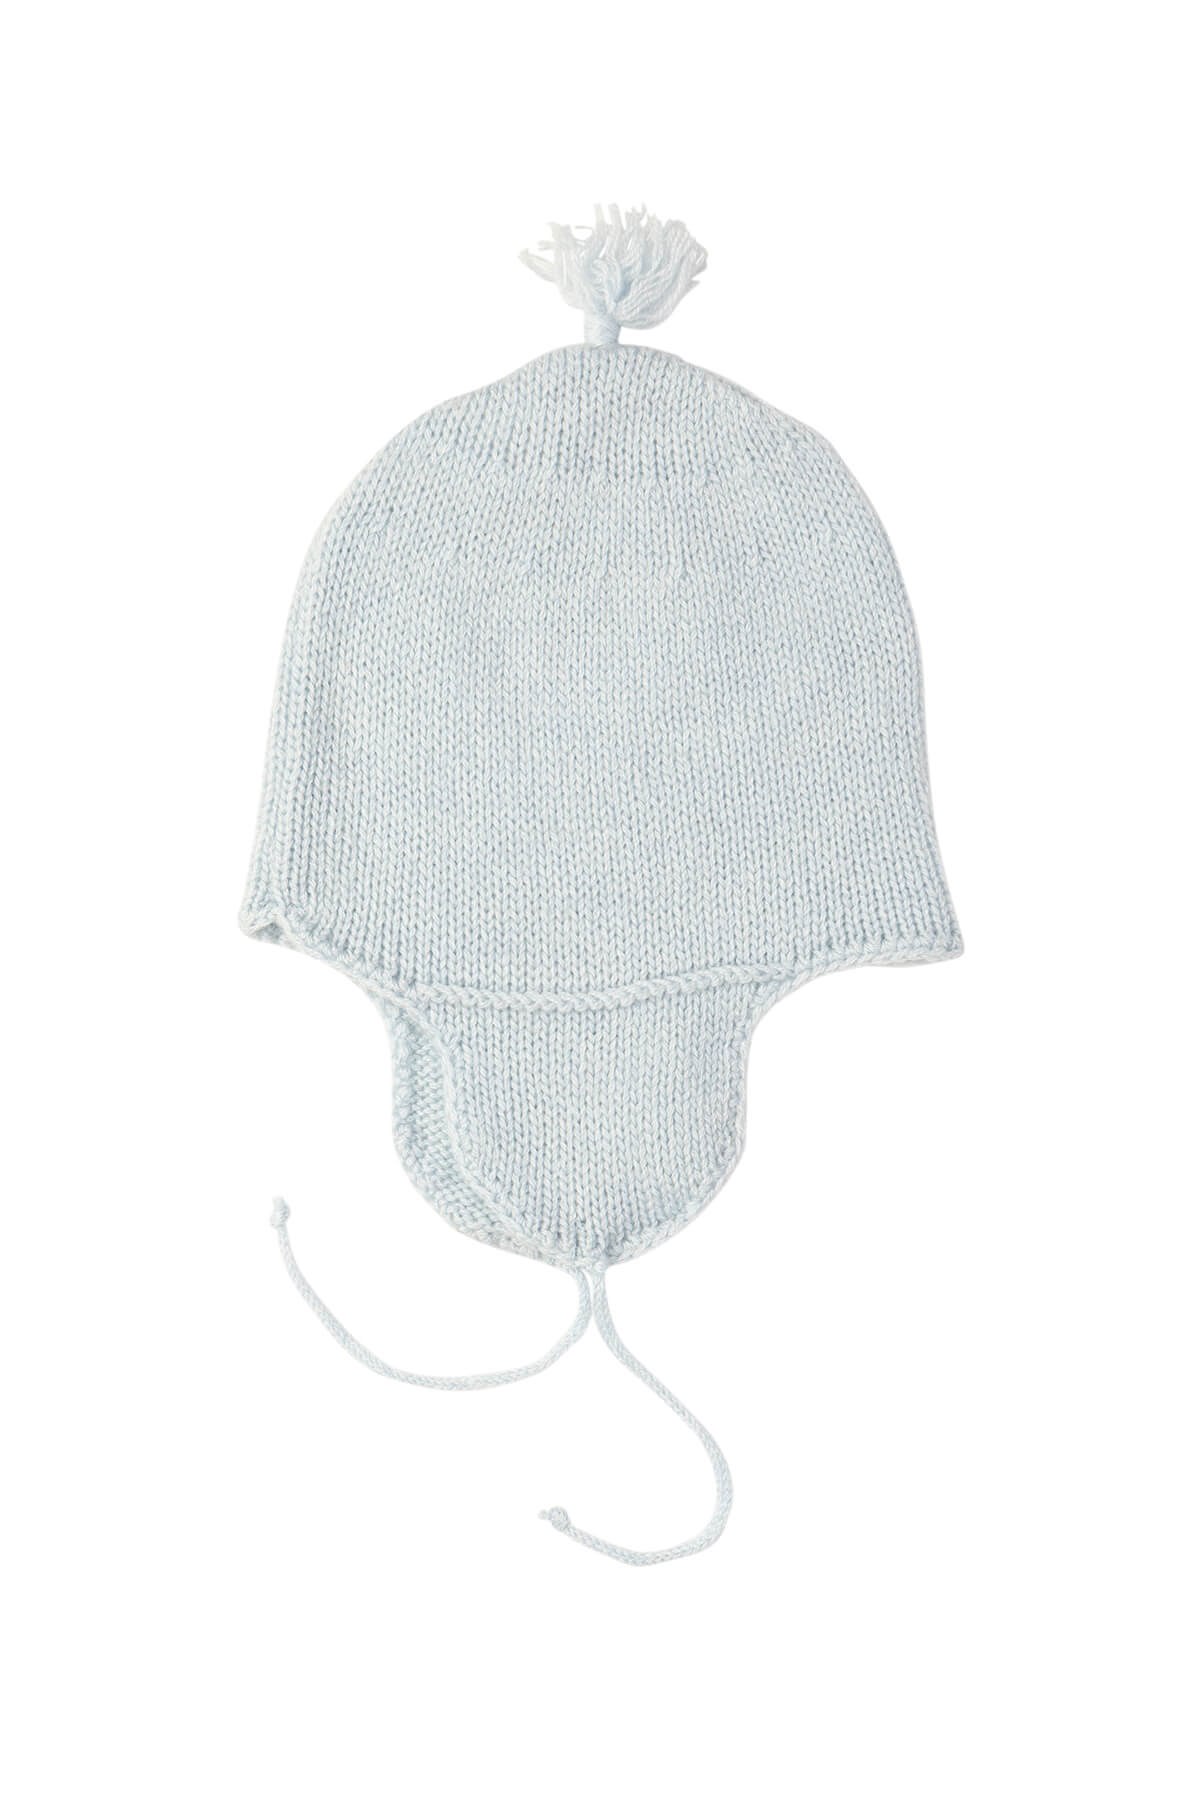 Johnstons of Elgin’s Baby's 1st Cashmere Baby Hat in Powder Blue on a white background AW21GIFTSET19C